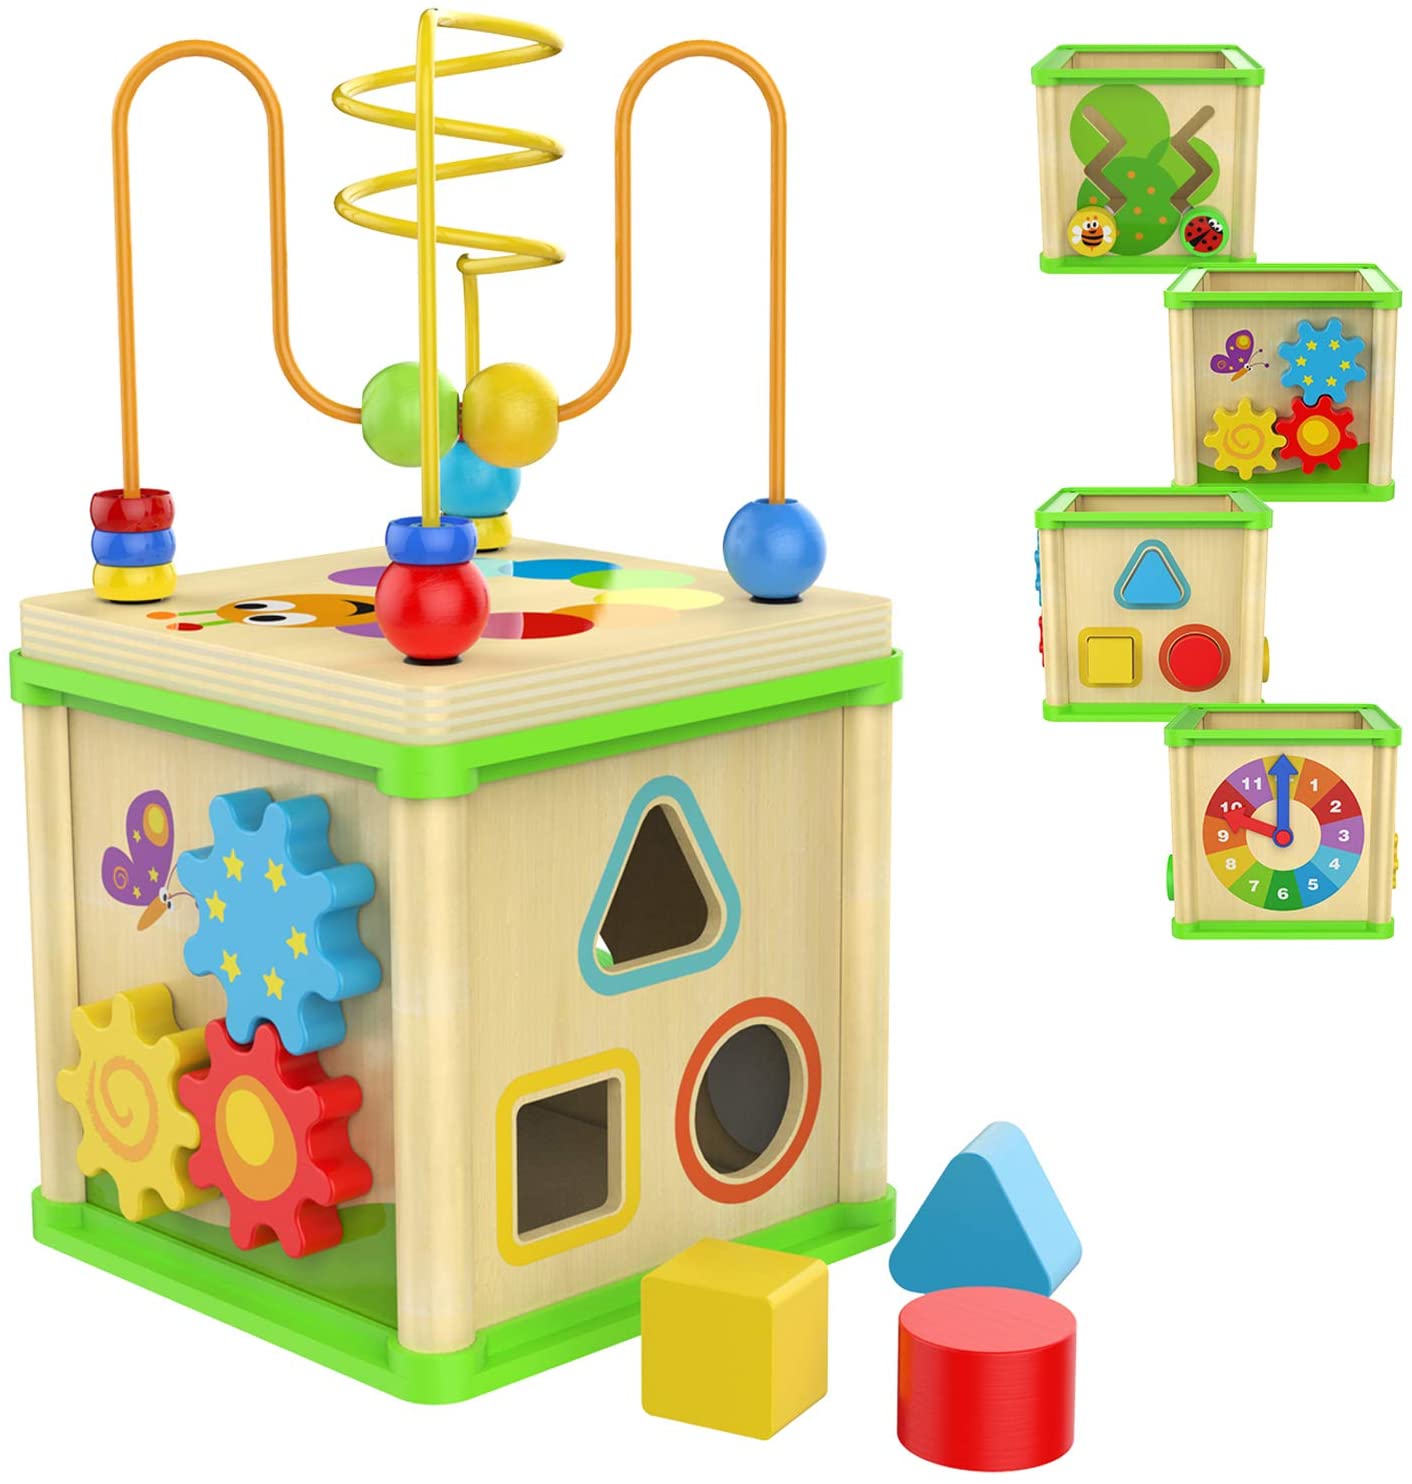 TOP BRIGHT Sensory Wood Activity Cube Toy For 1-Year-Old Boy